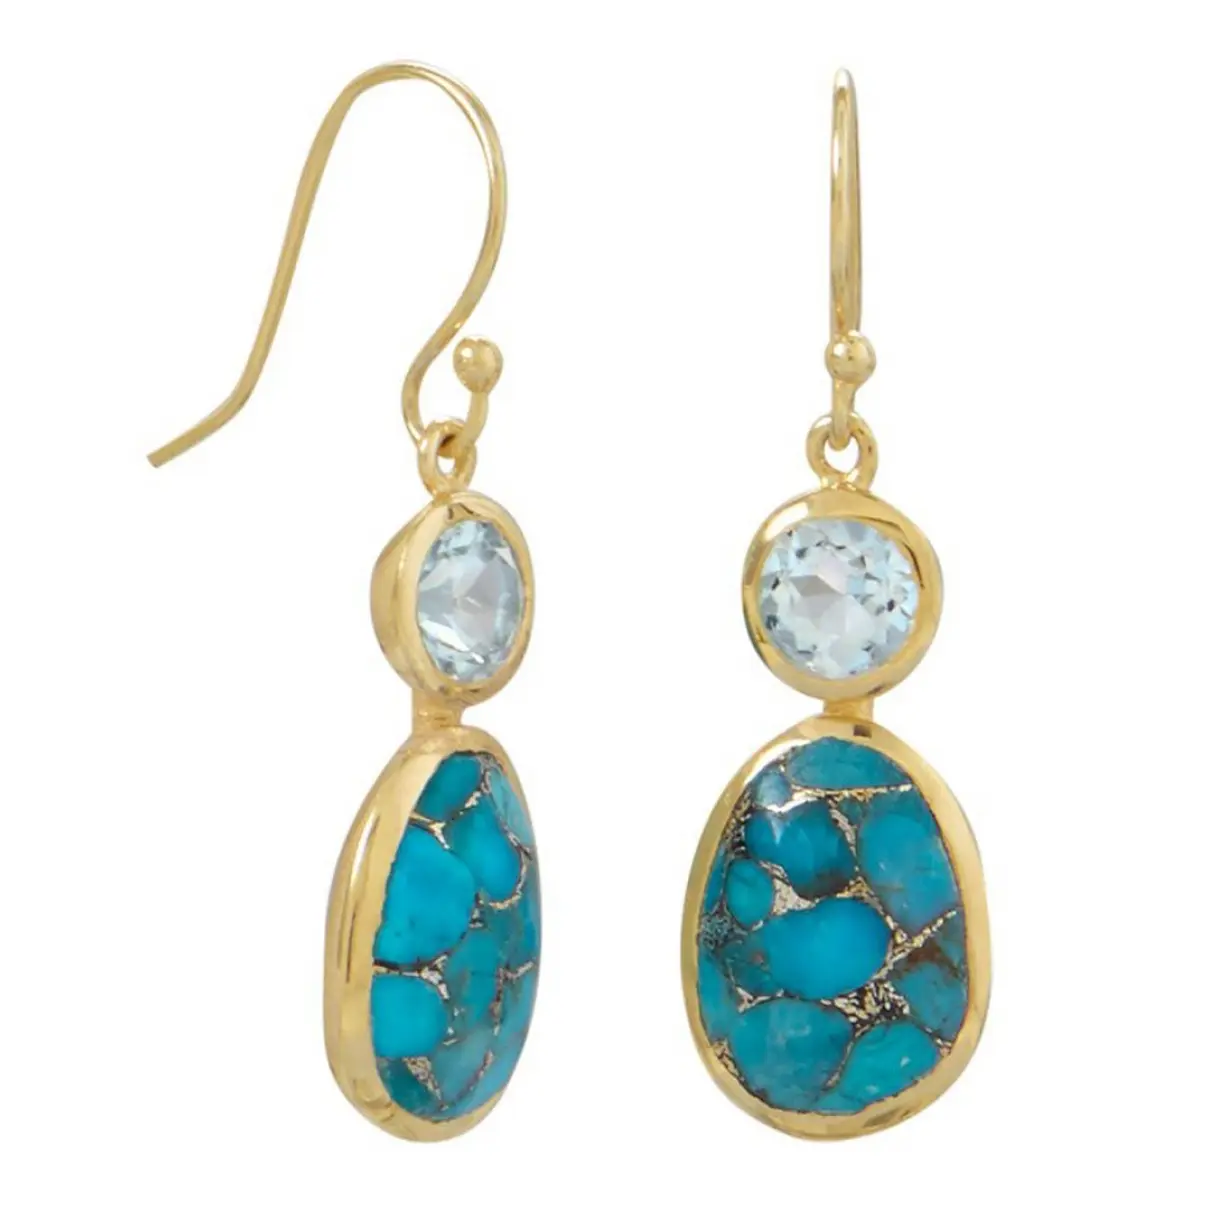 Liv Oliver Yellow gold earrings for sale